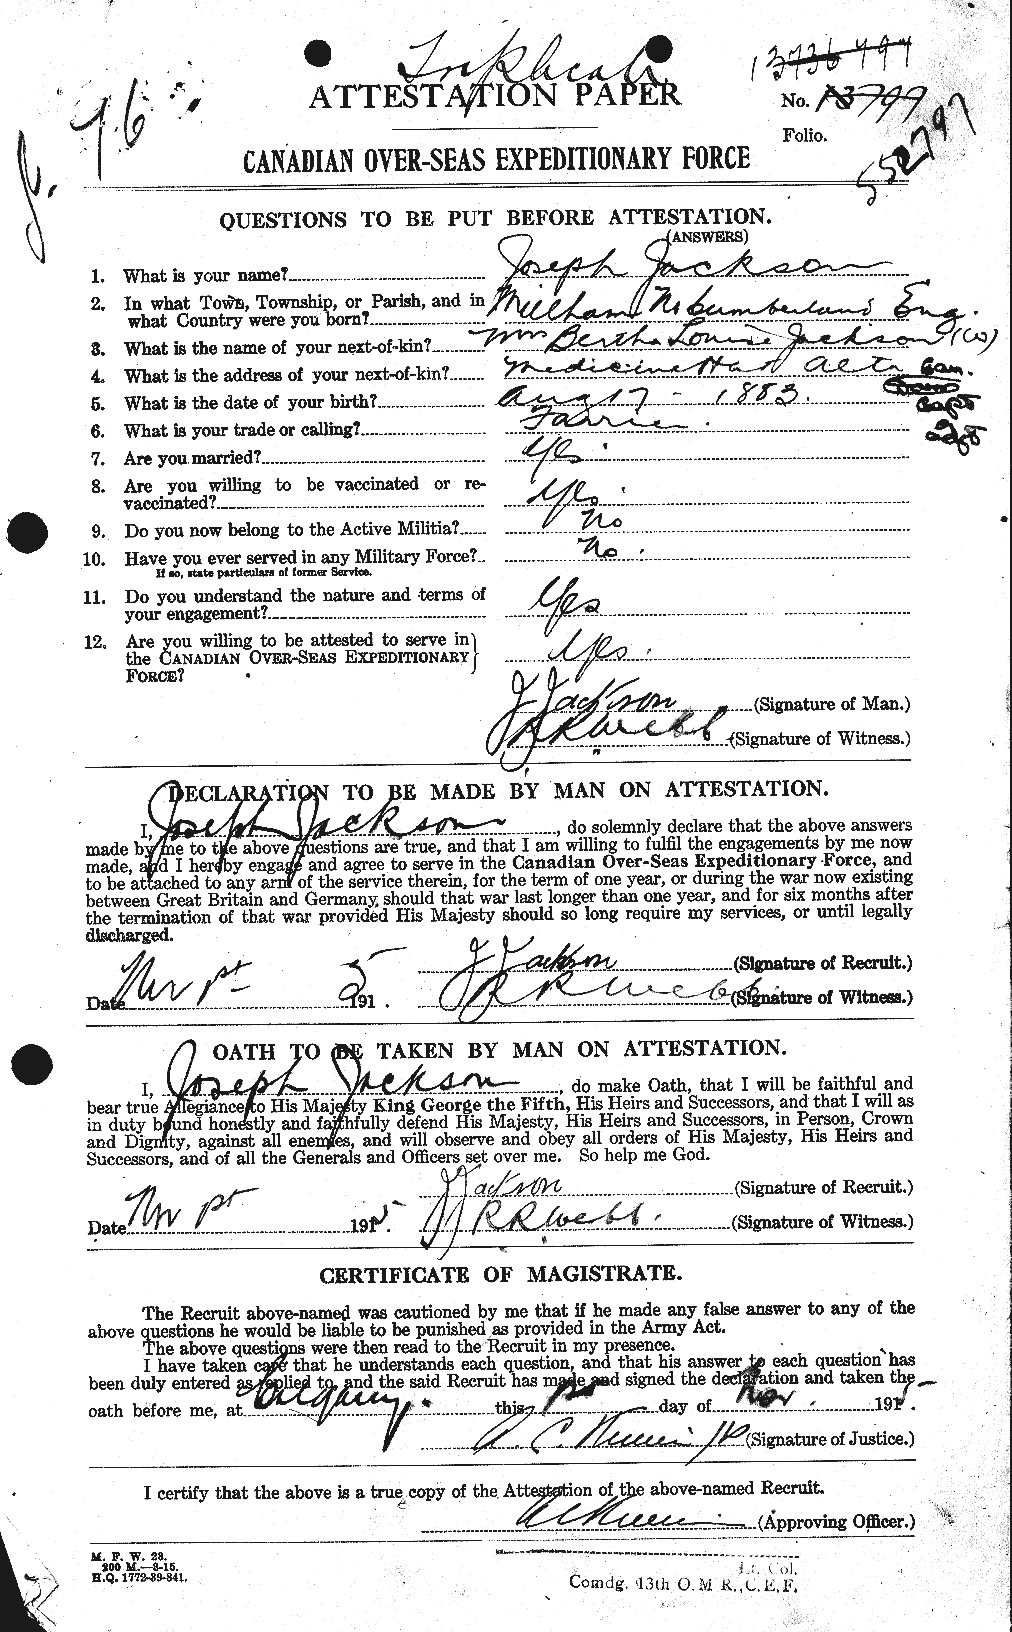 Personnel Records of the First World War - CEF 414372a